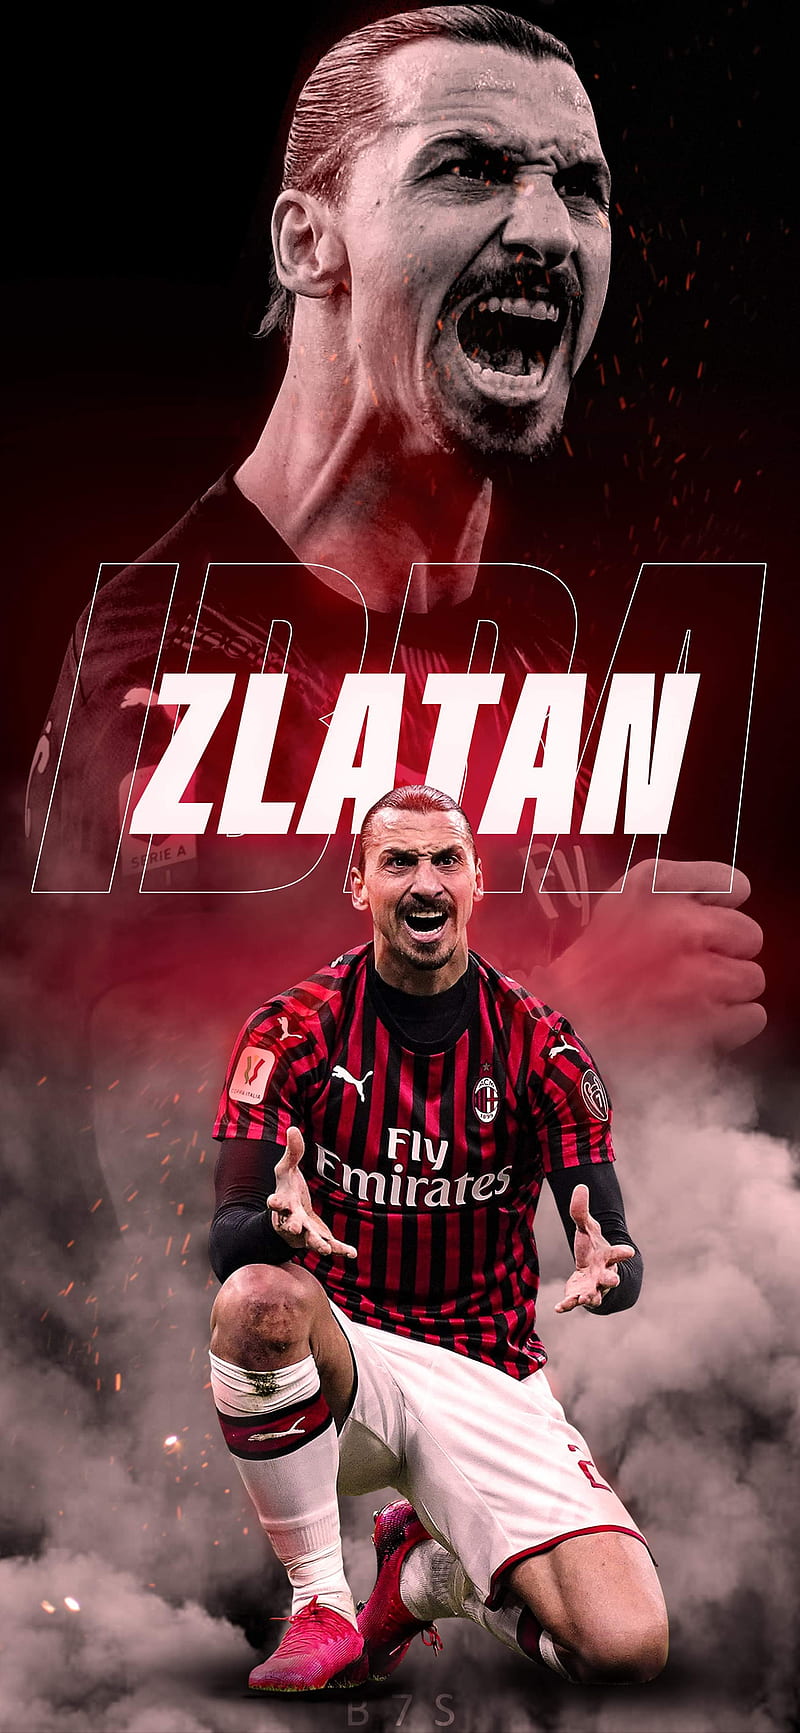 Zlatan Ibrahimovic Tribute Wallpaper, HD Sports 4K Wallpapers, Images and  Background - Wallpapers Den